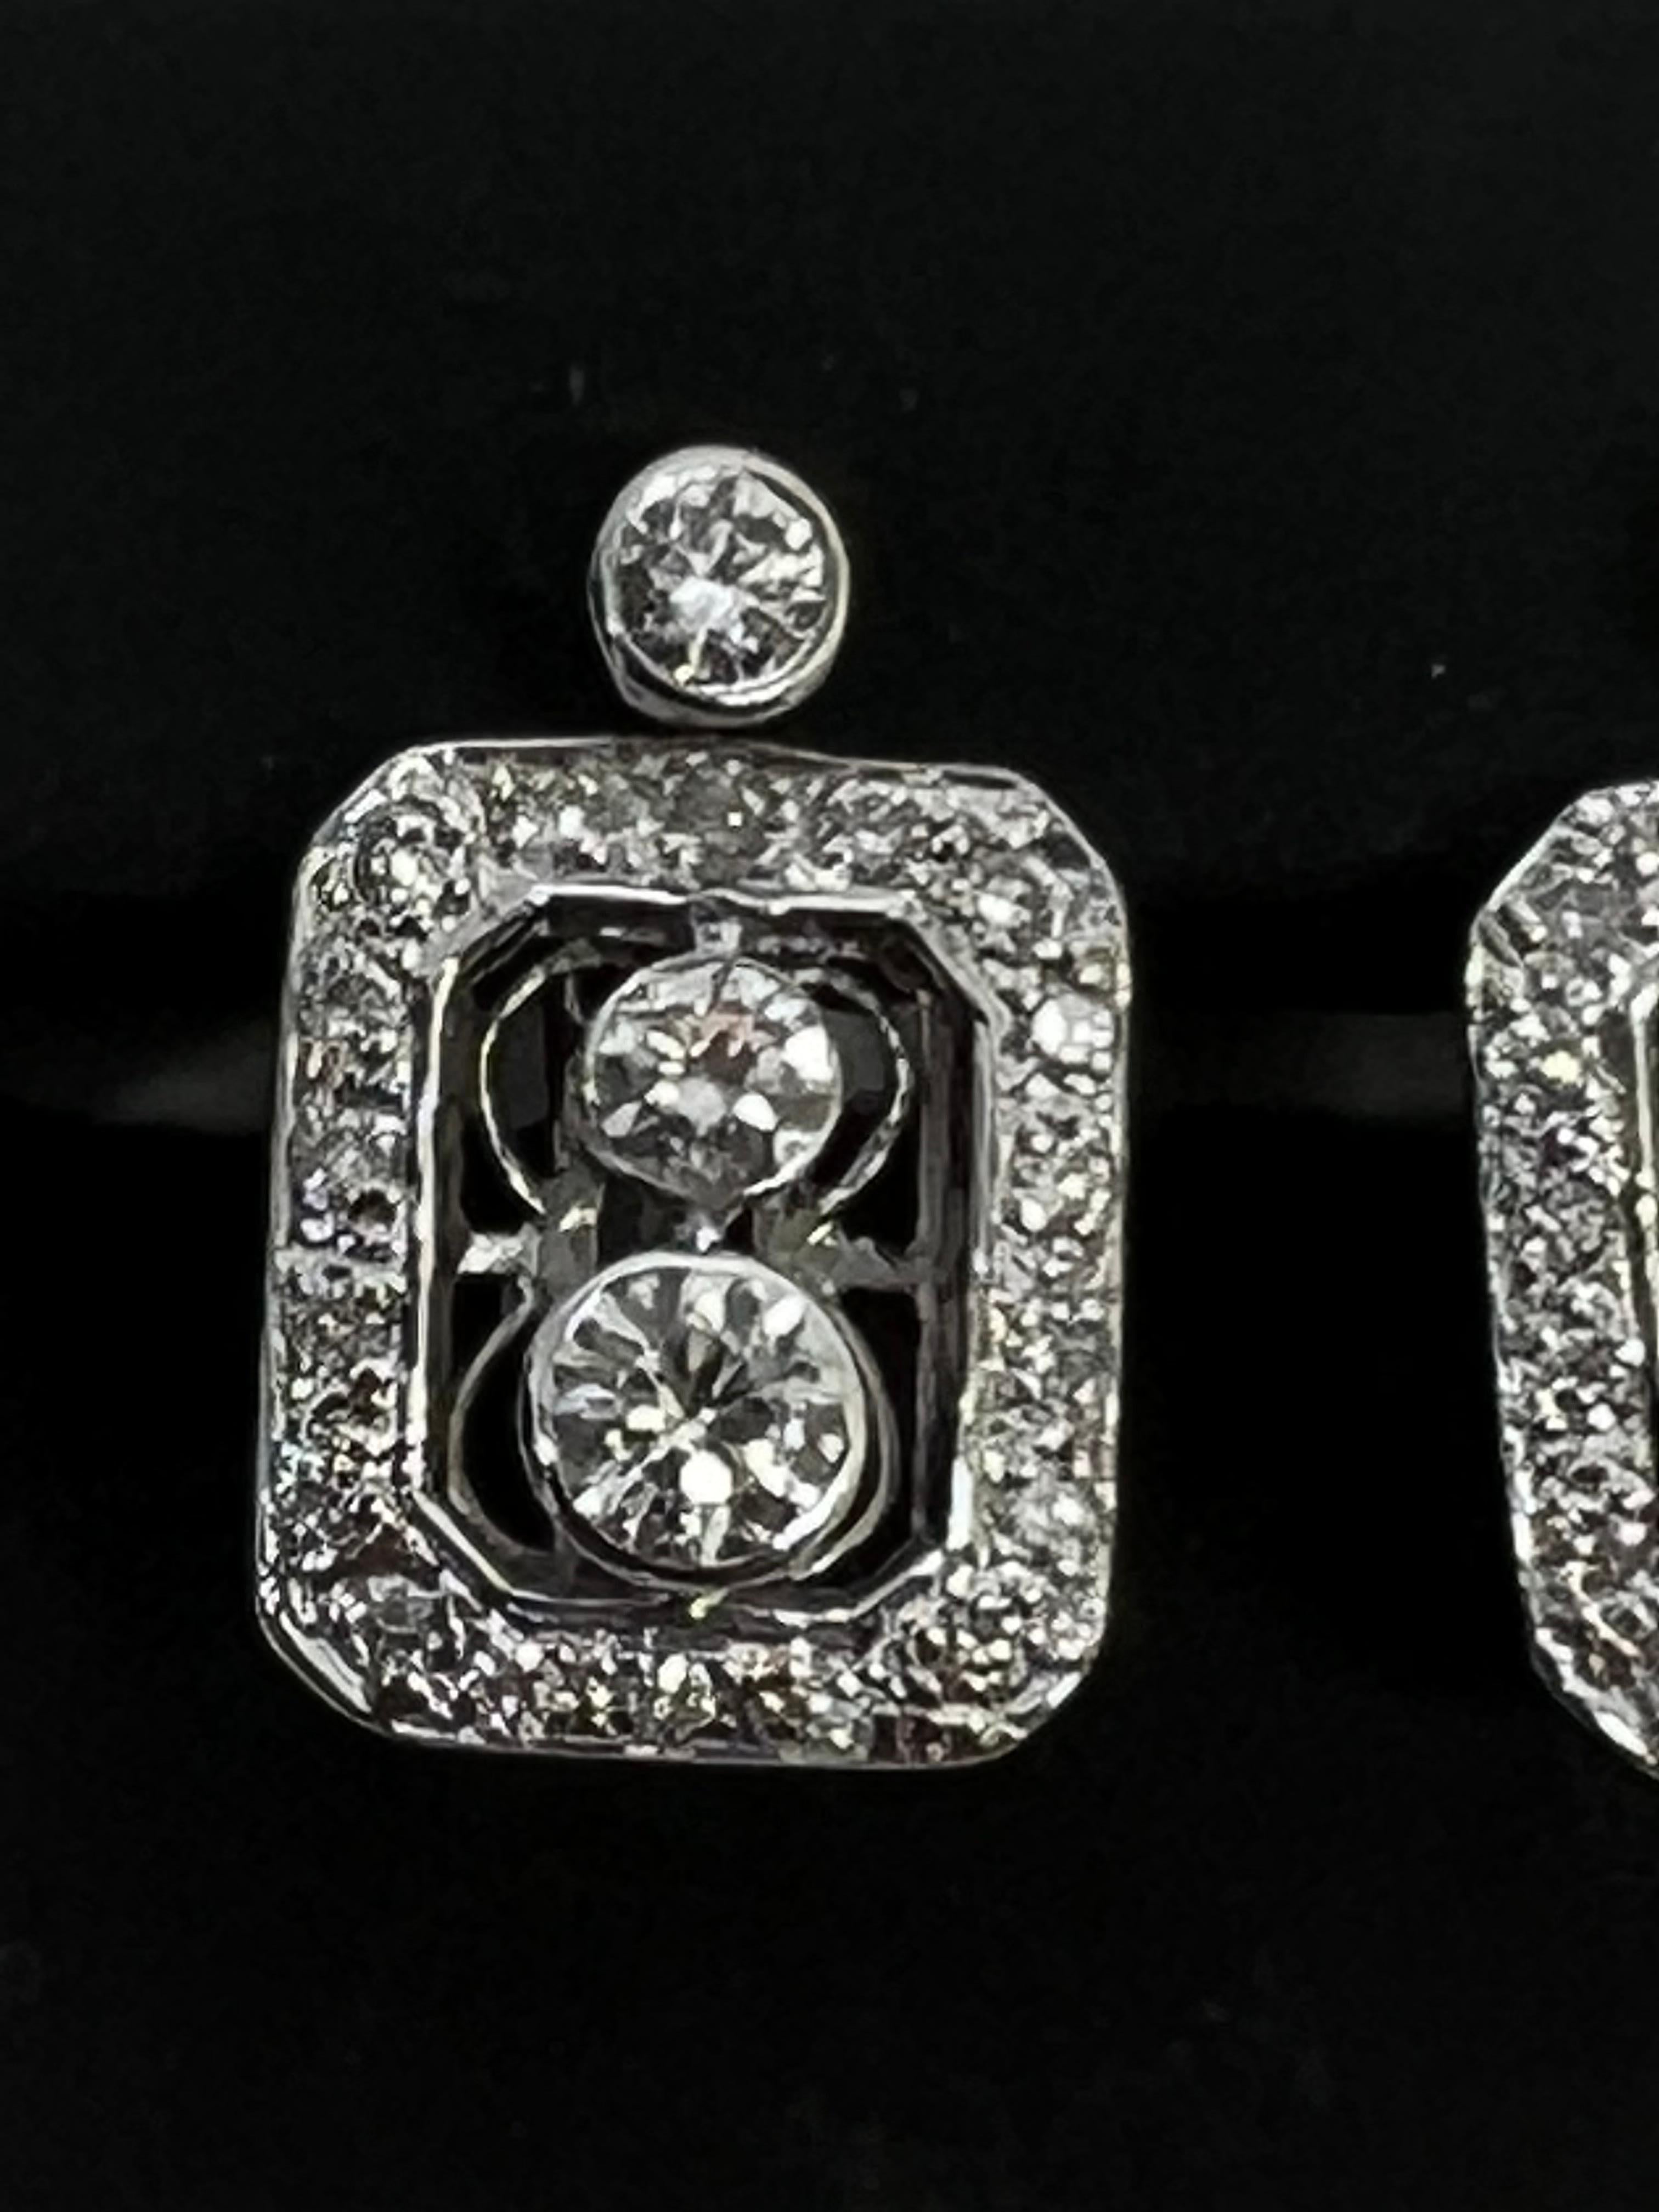 Elevate your jewelry collection with these stunning 14k white gold diamond dangle earrings. The pave setting style with bezel accentuates the natural round-shaped white diamond, creating a breathtaking sparkle that will catch everyone's eye. The